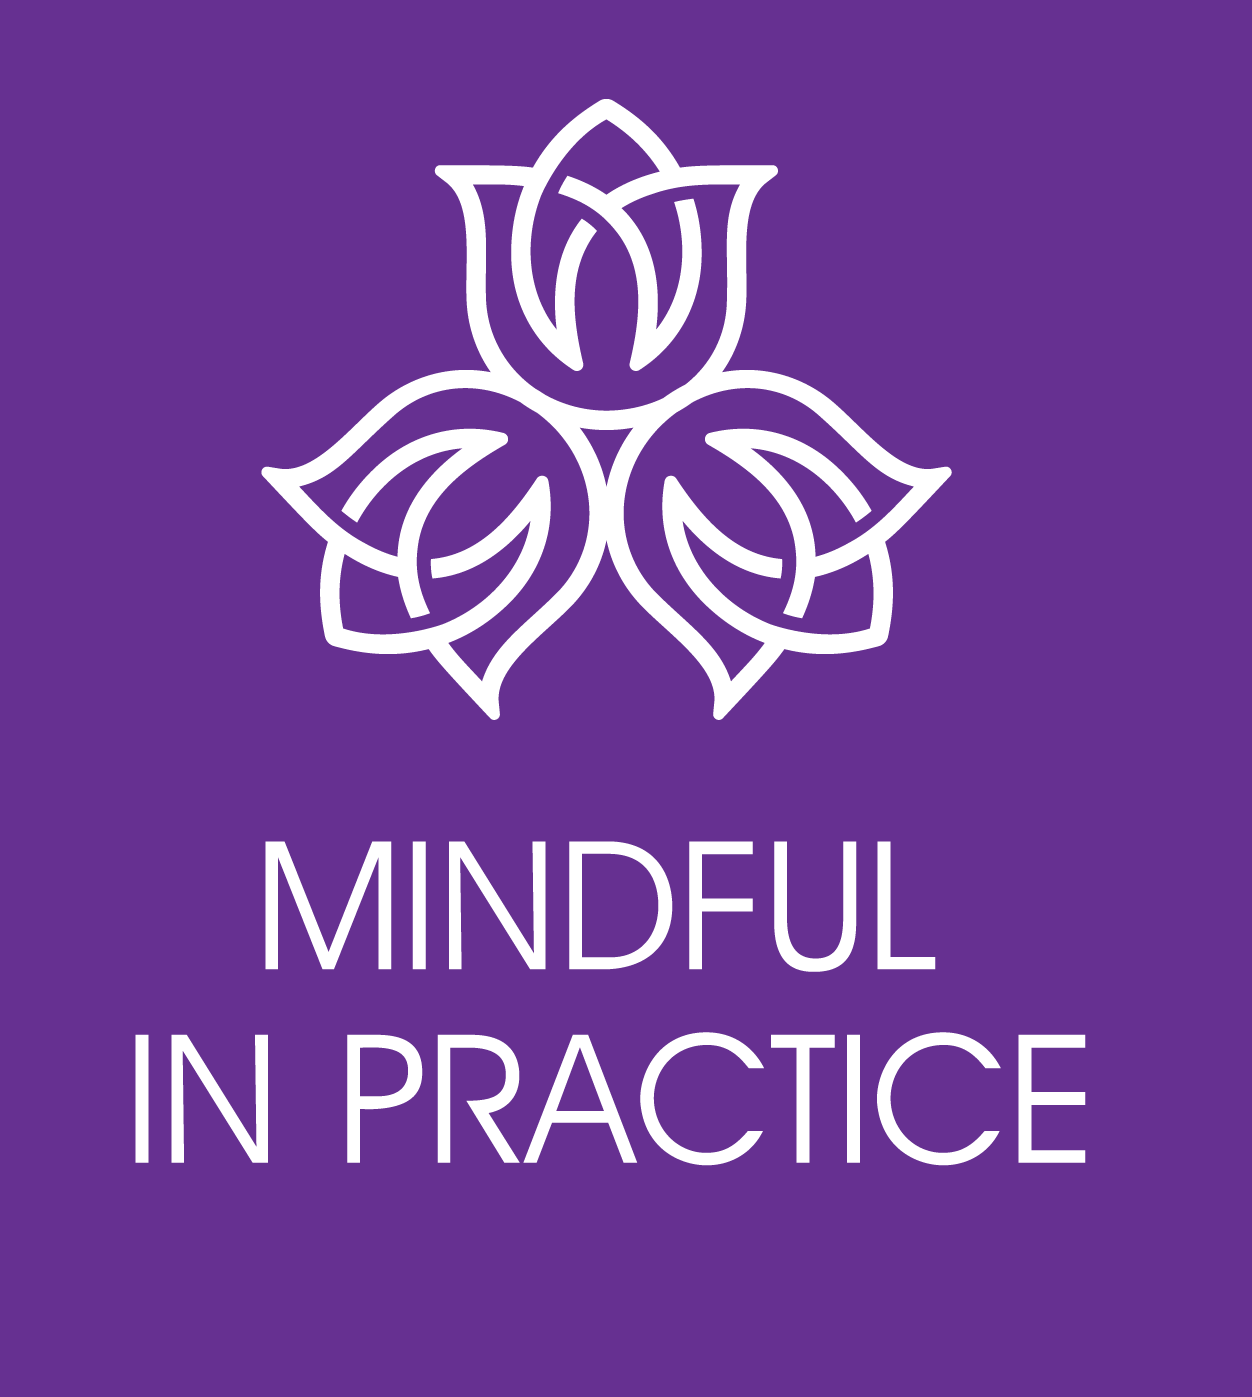 Mindful in Practice